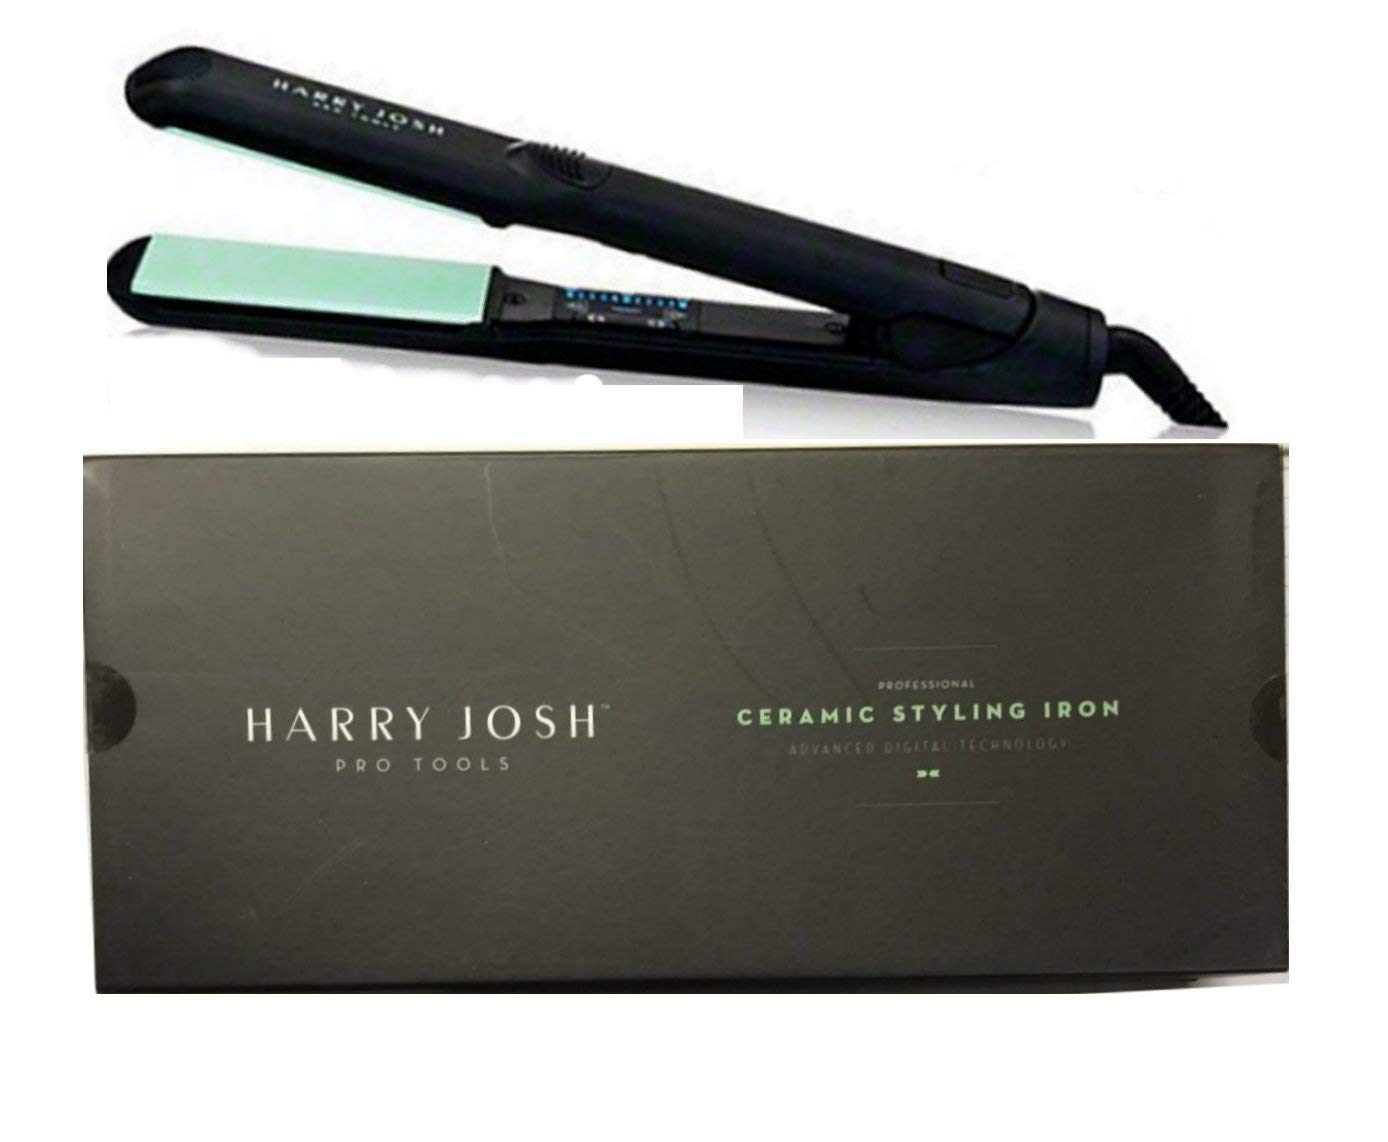 Buy Harry Josh Pro Tools Ceramic Styling flat Iron Online at Low Prices in India - Amazon.in